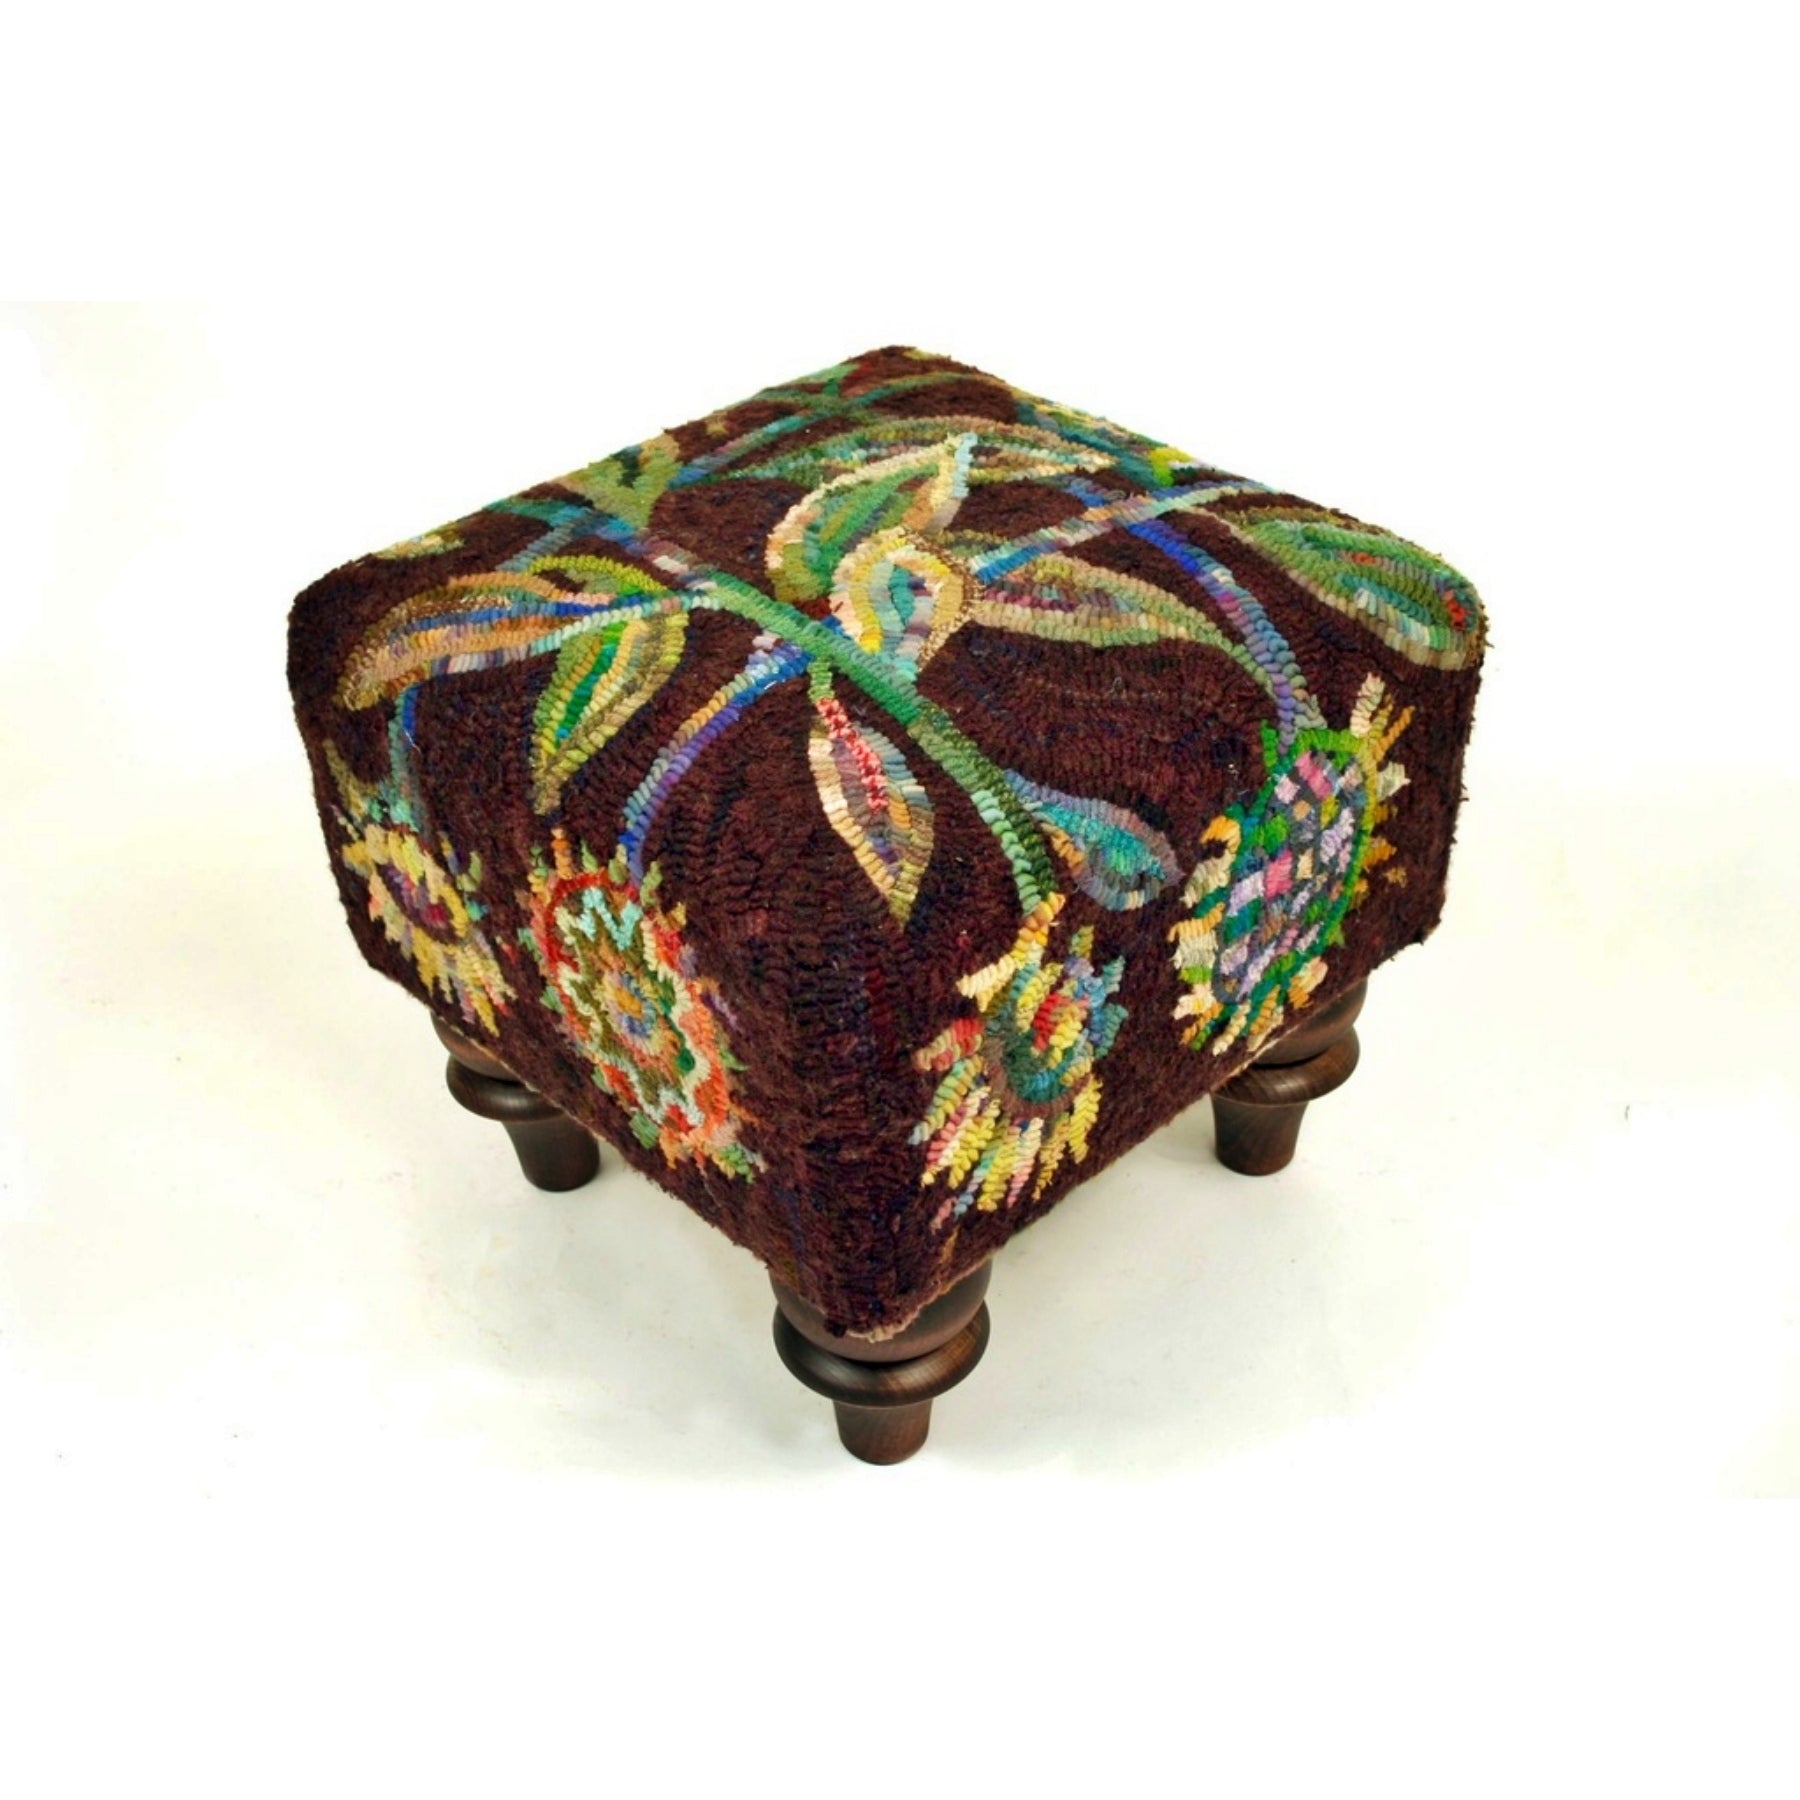 Sunflower - Square Footstool Pattern, rug hooked by Kim Nixon